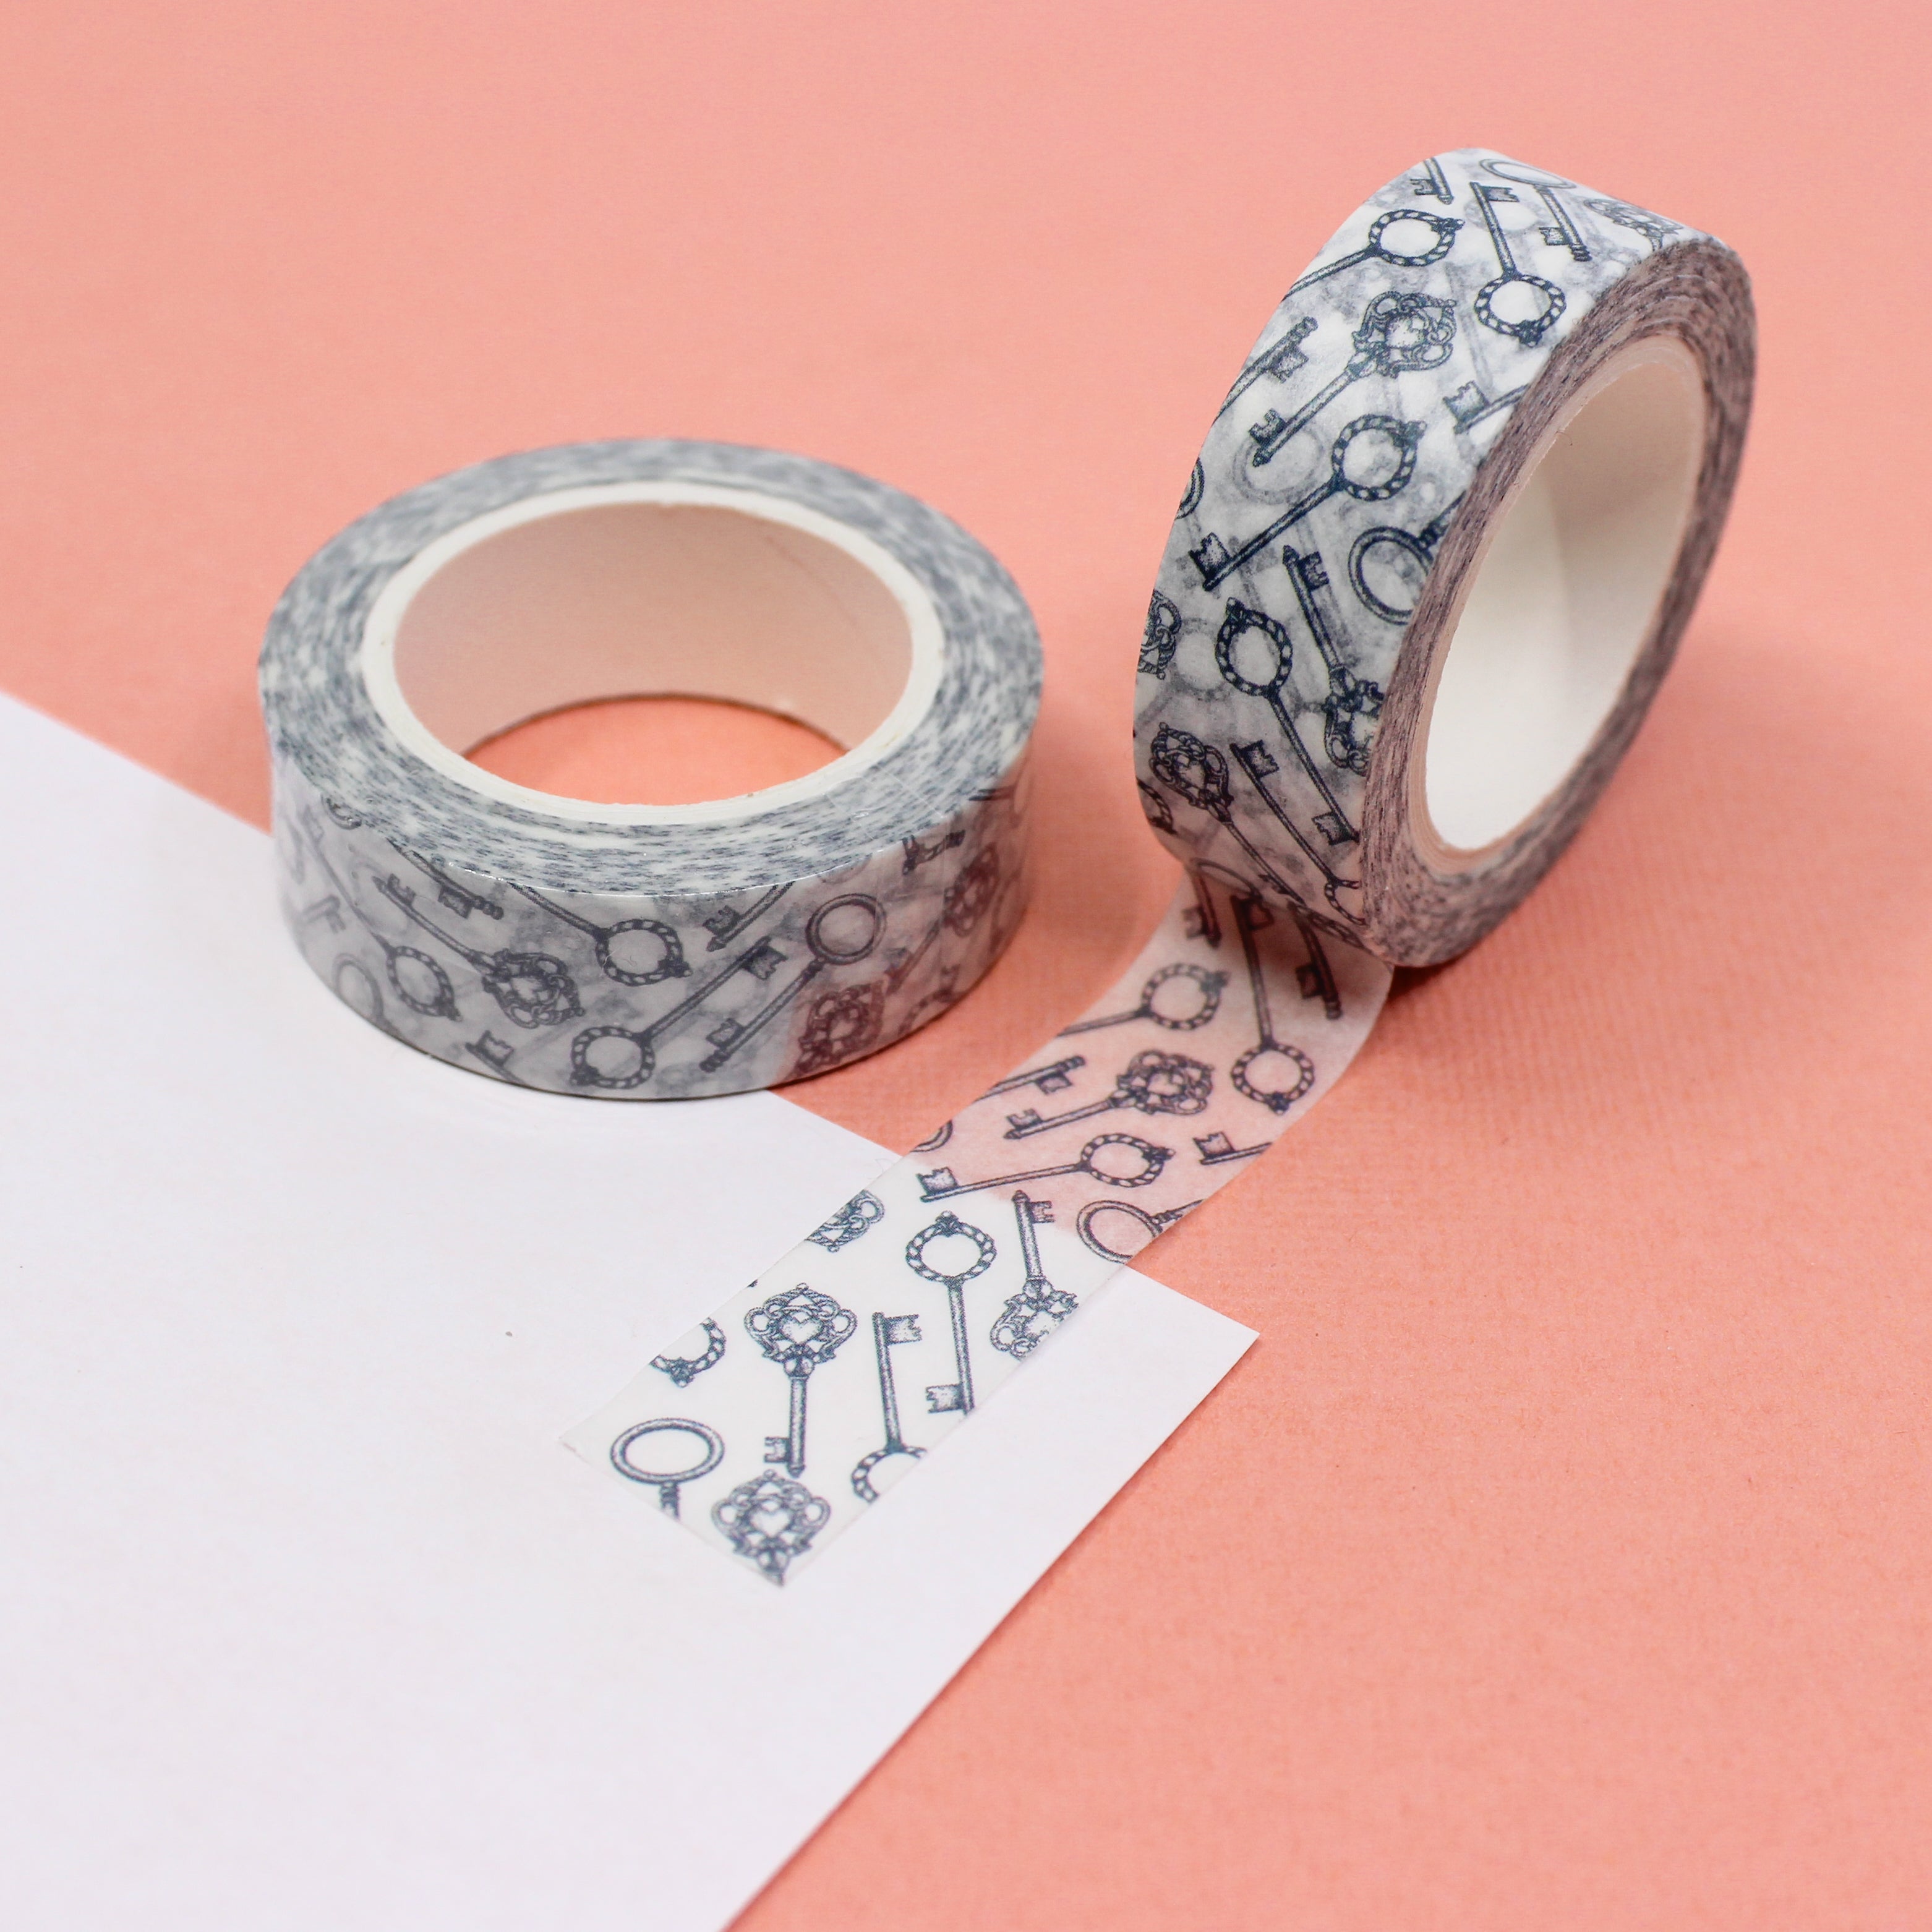 Unlock your creativity with our captivating black and white key washi tape, featuring an intricate key pattern for a touch of mystery and elegance. This tape is sold at BBB Supplies Craft Shop.